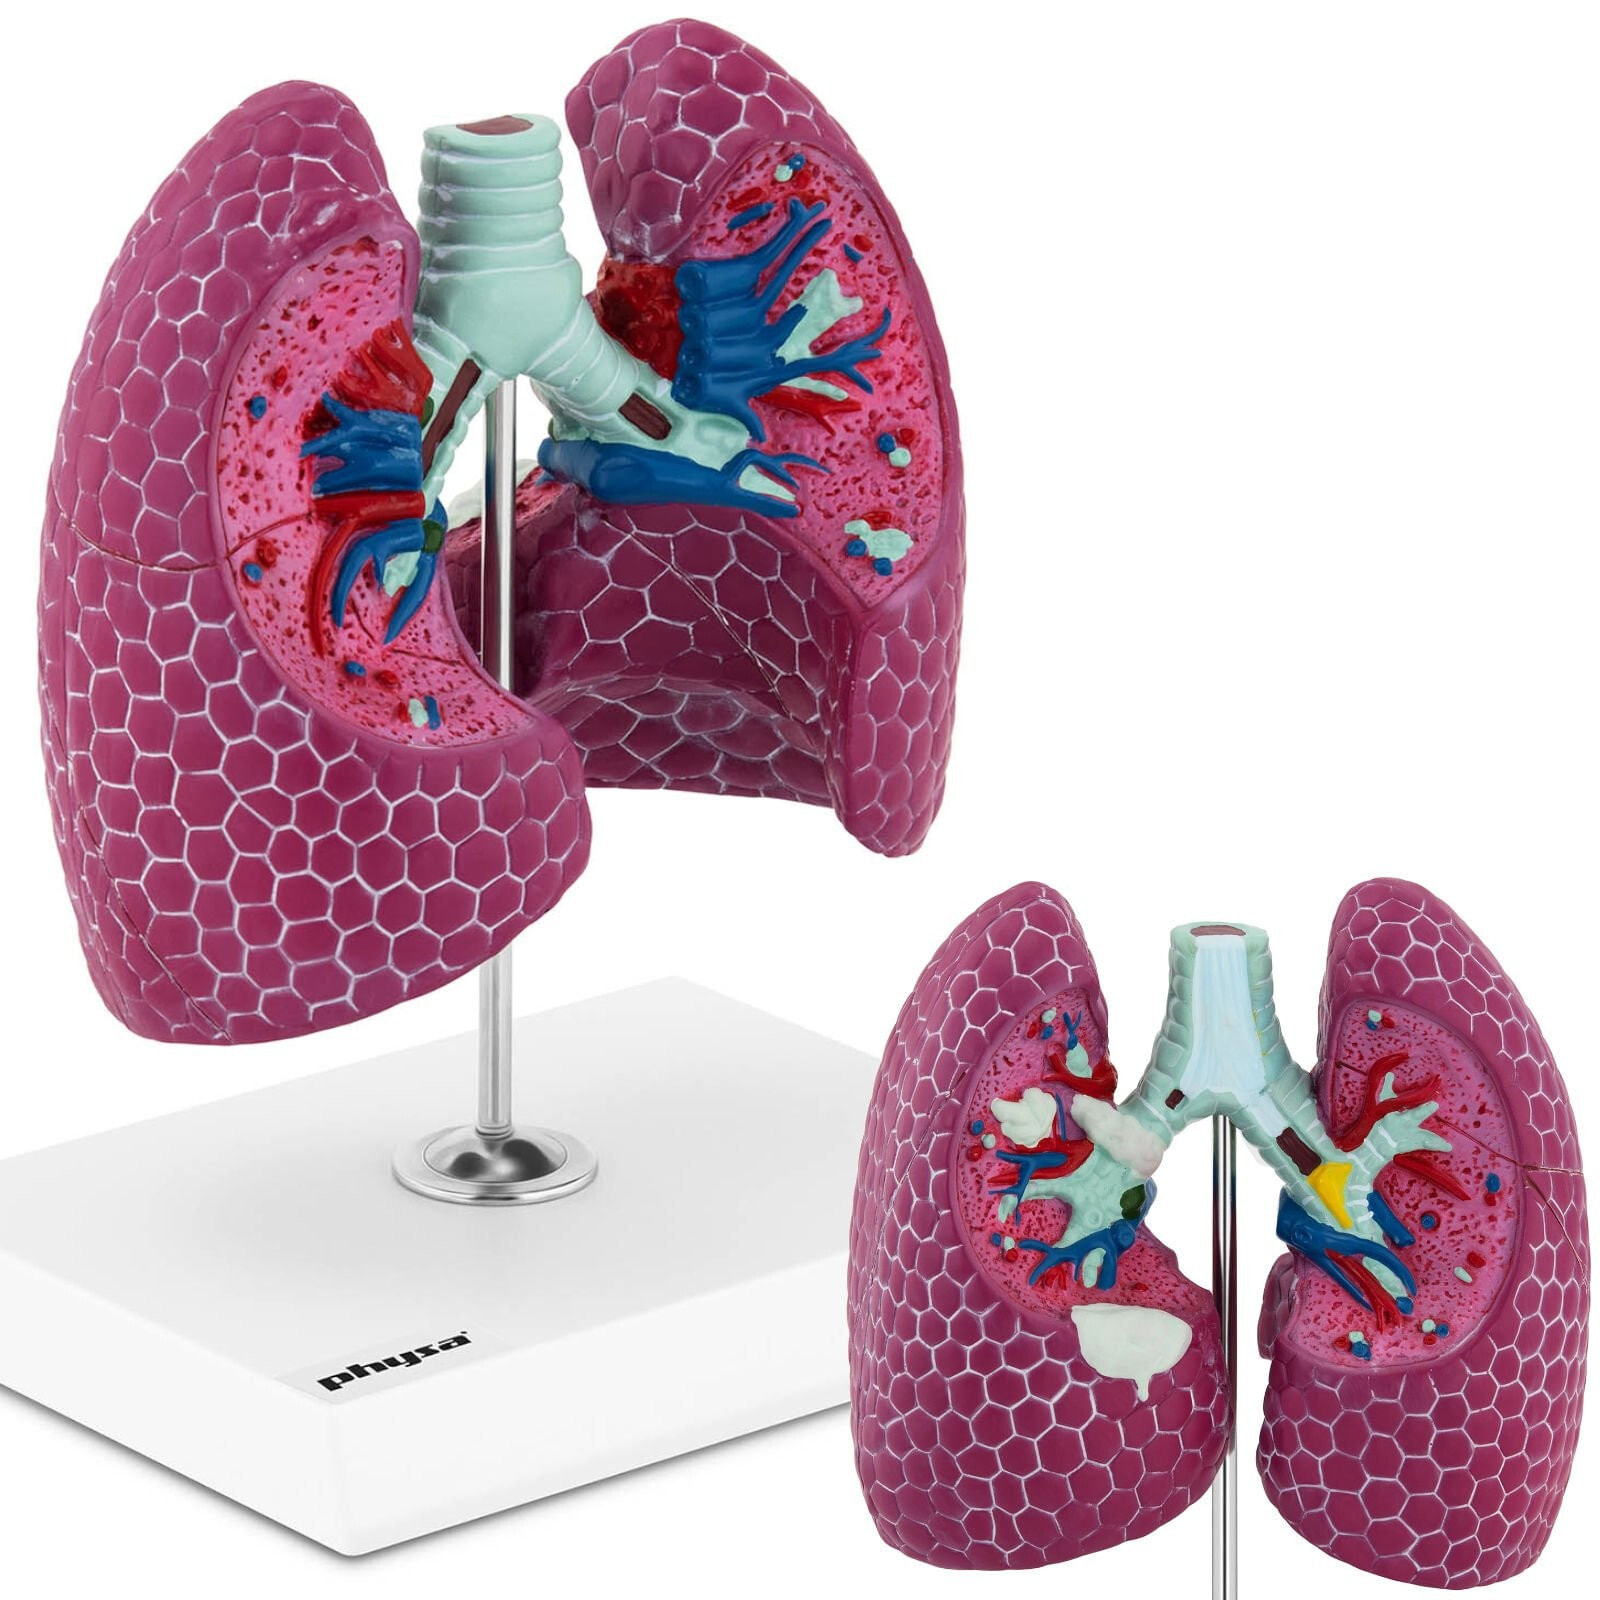 3D anatomical model of human lung with lesions